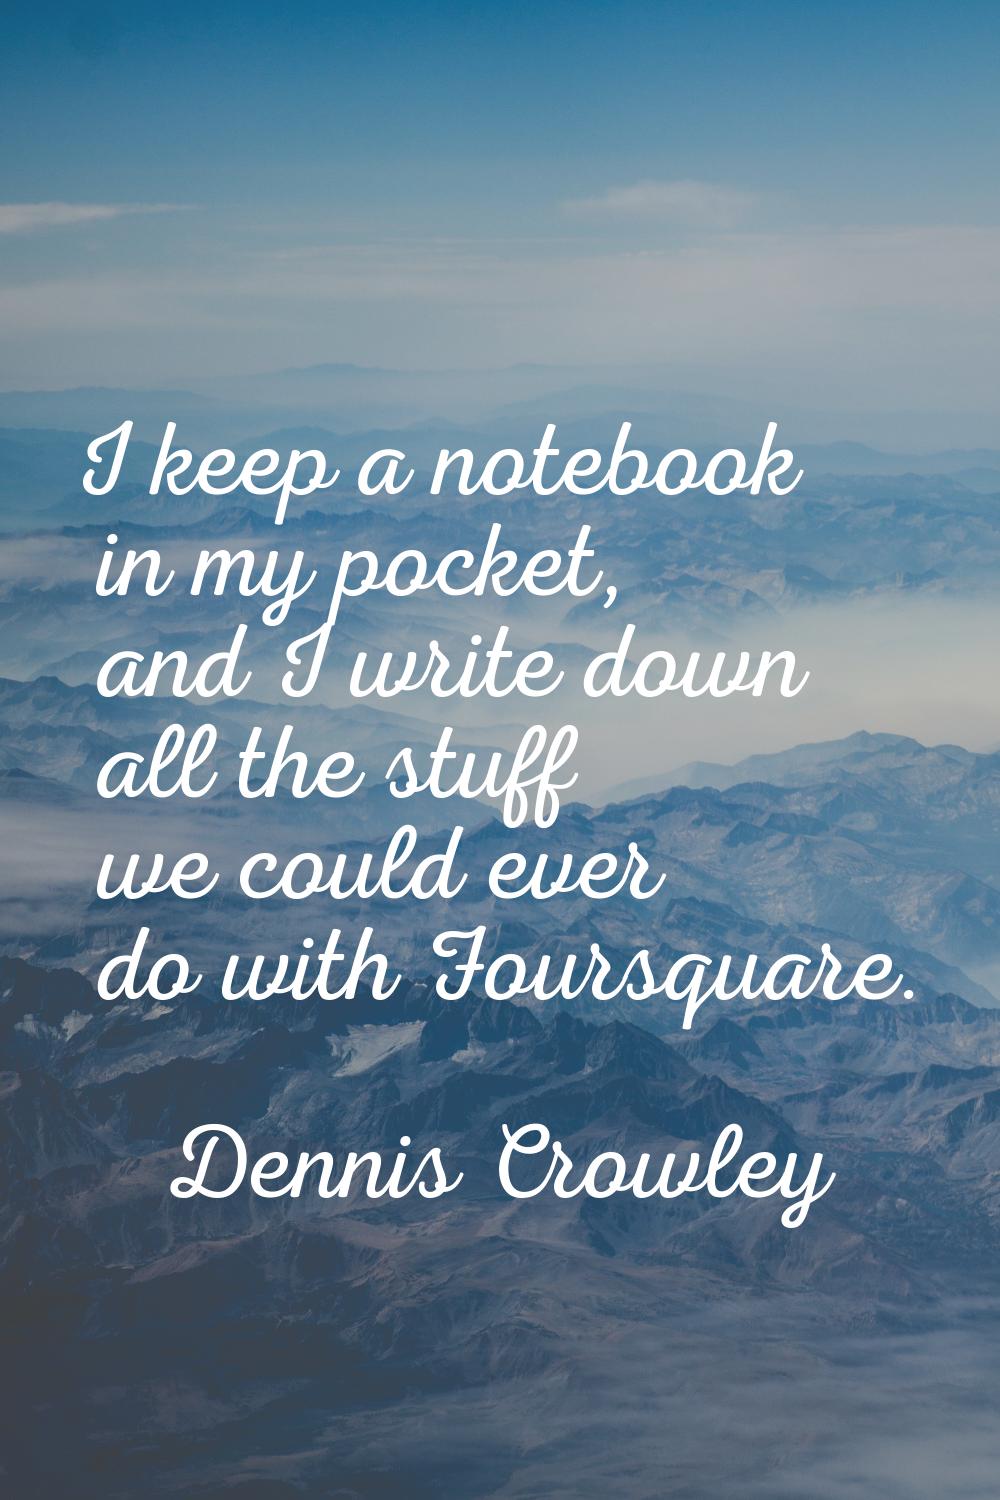 I keep a notebook in my pocket, and I write down all the stuff we could ever do with Foursquare.